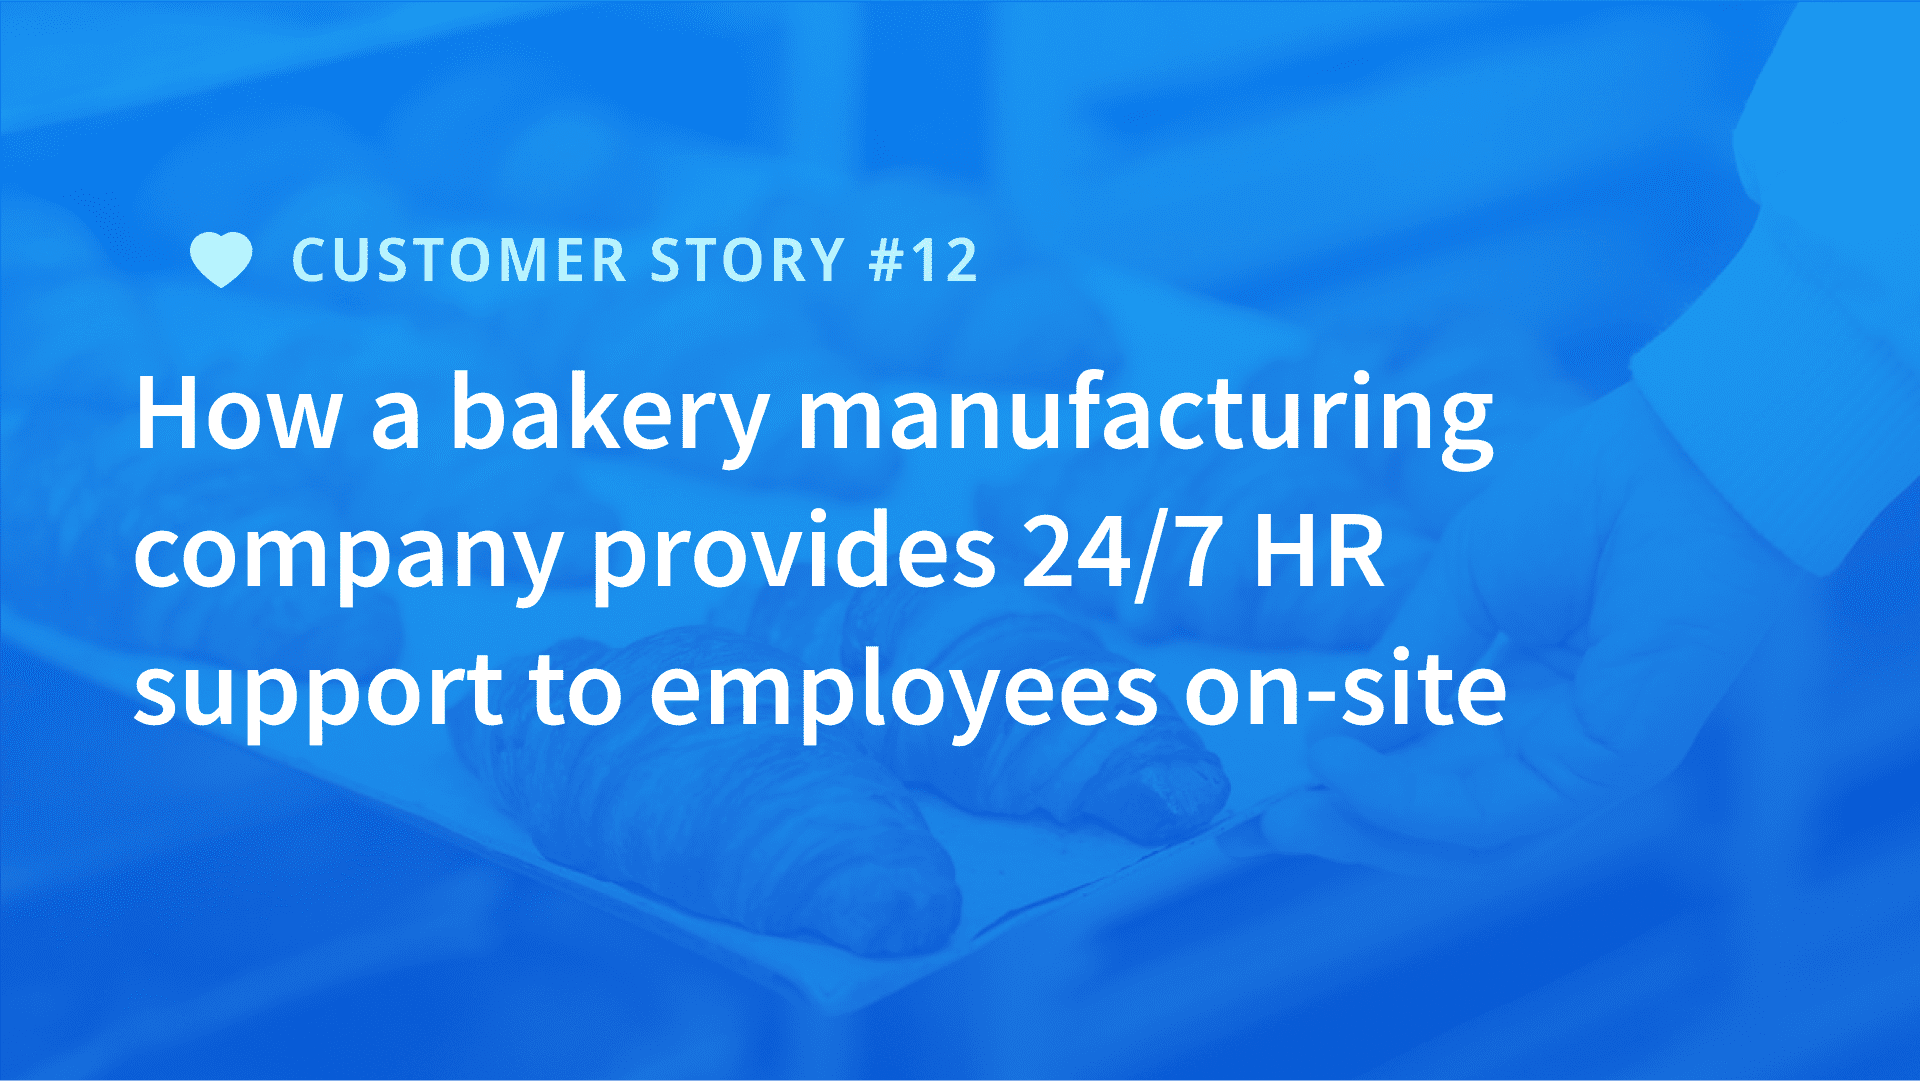 How a bakery manufacturing company provides 24/7 HR support to employee on-site